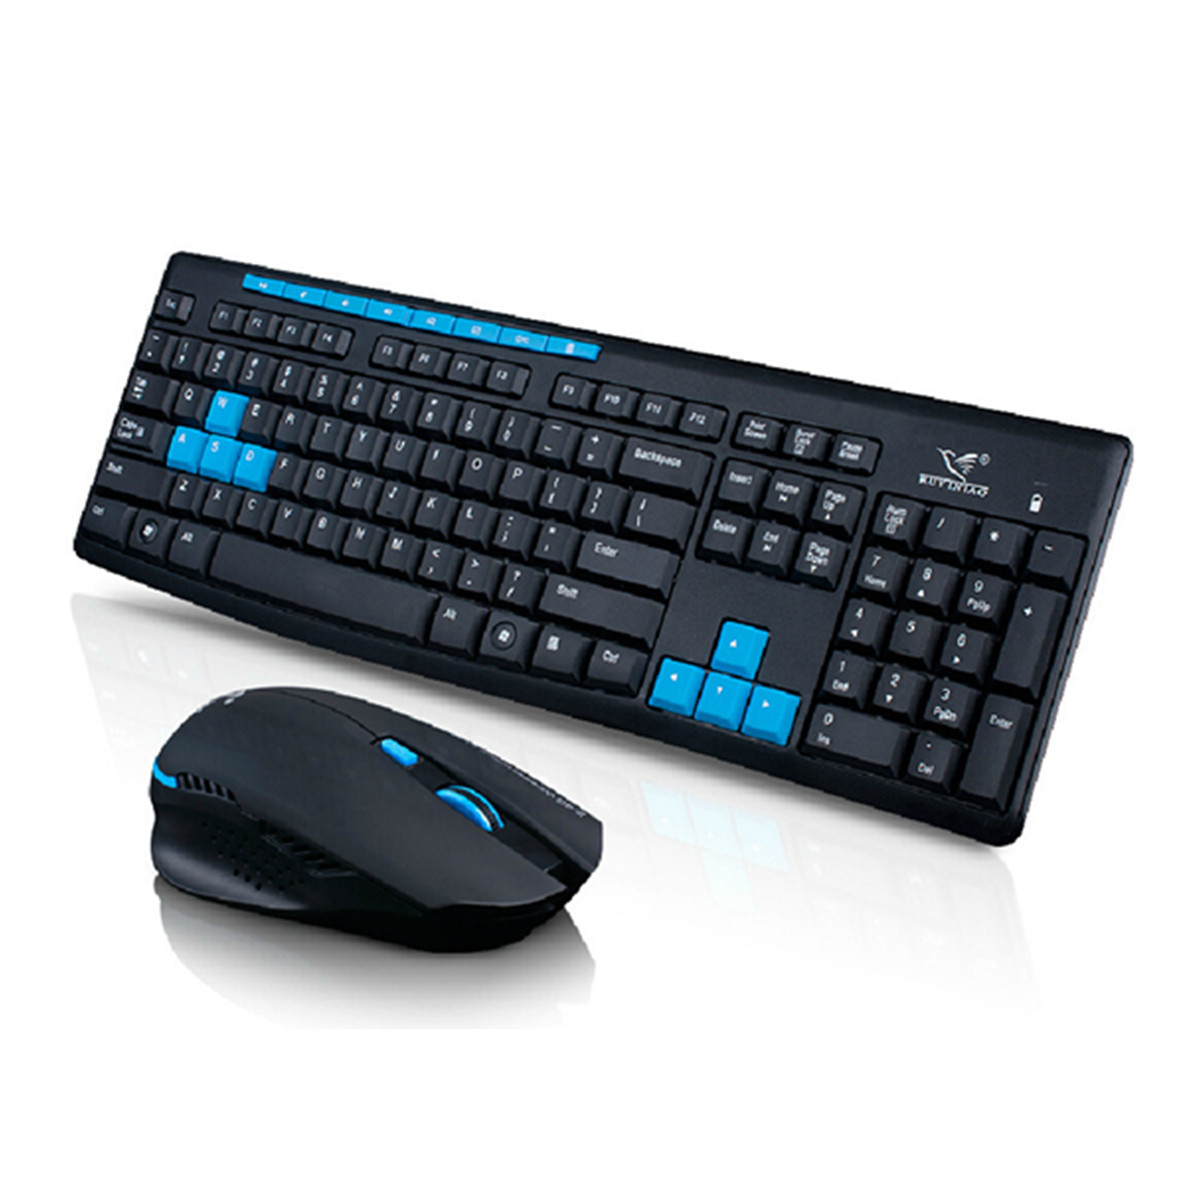 

HK3800 2.4GHz Wireless Gaming Office Keyboard and 1600DPI Optics Mouse Combo Kit